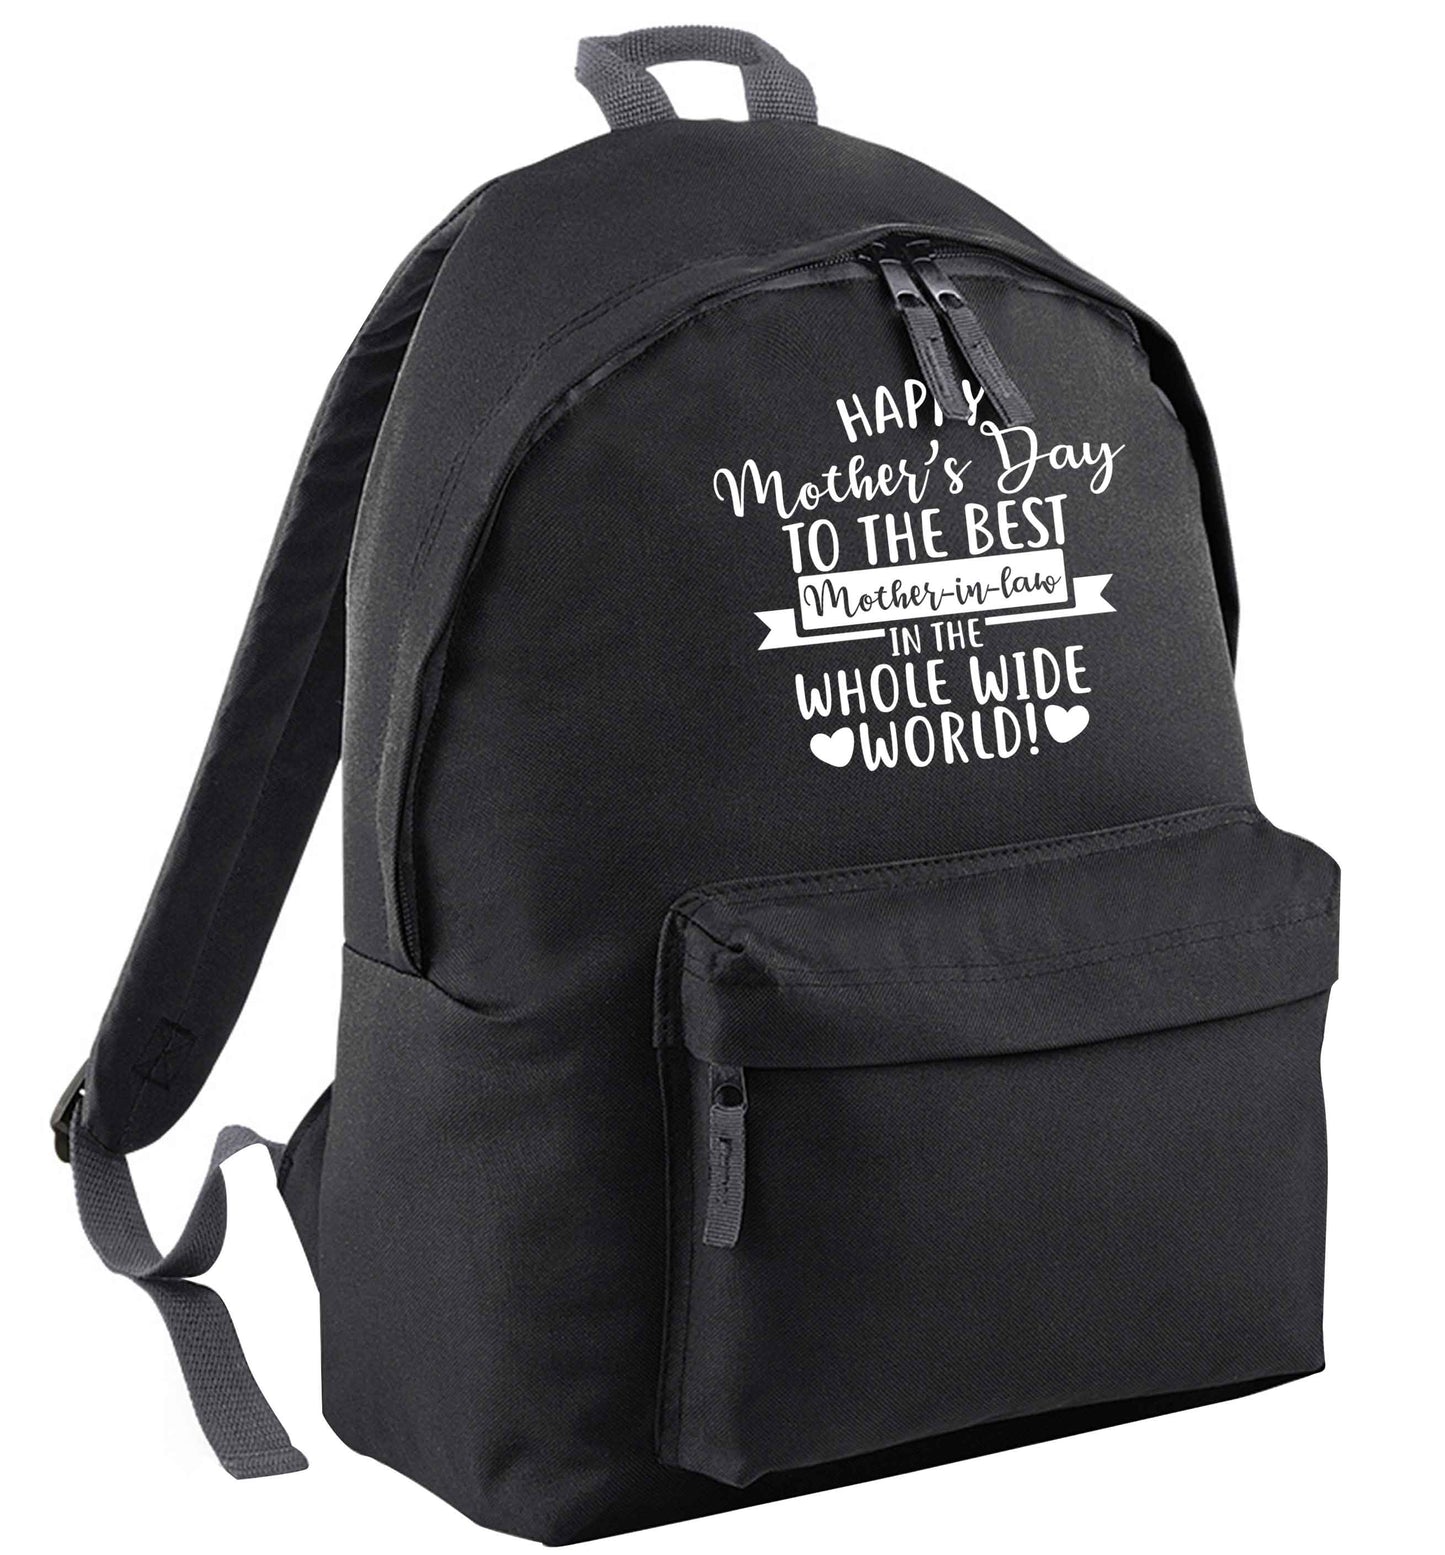 Happy mother's day to the best mother-in law in the world | Children's backpack